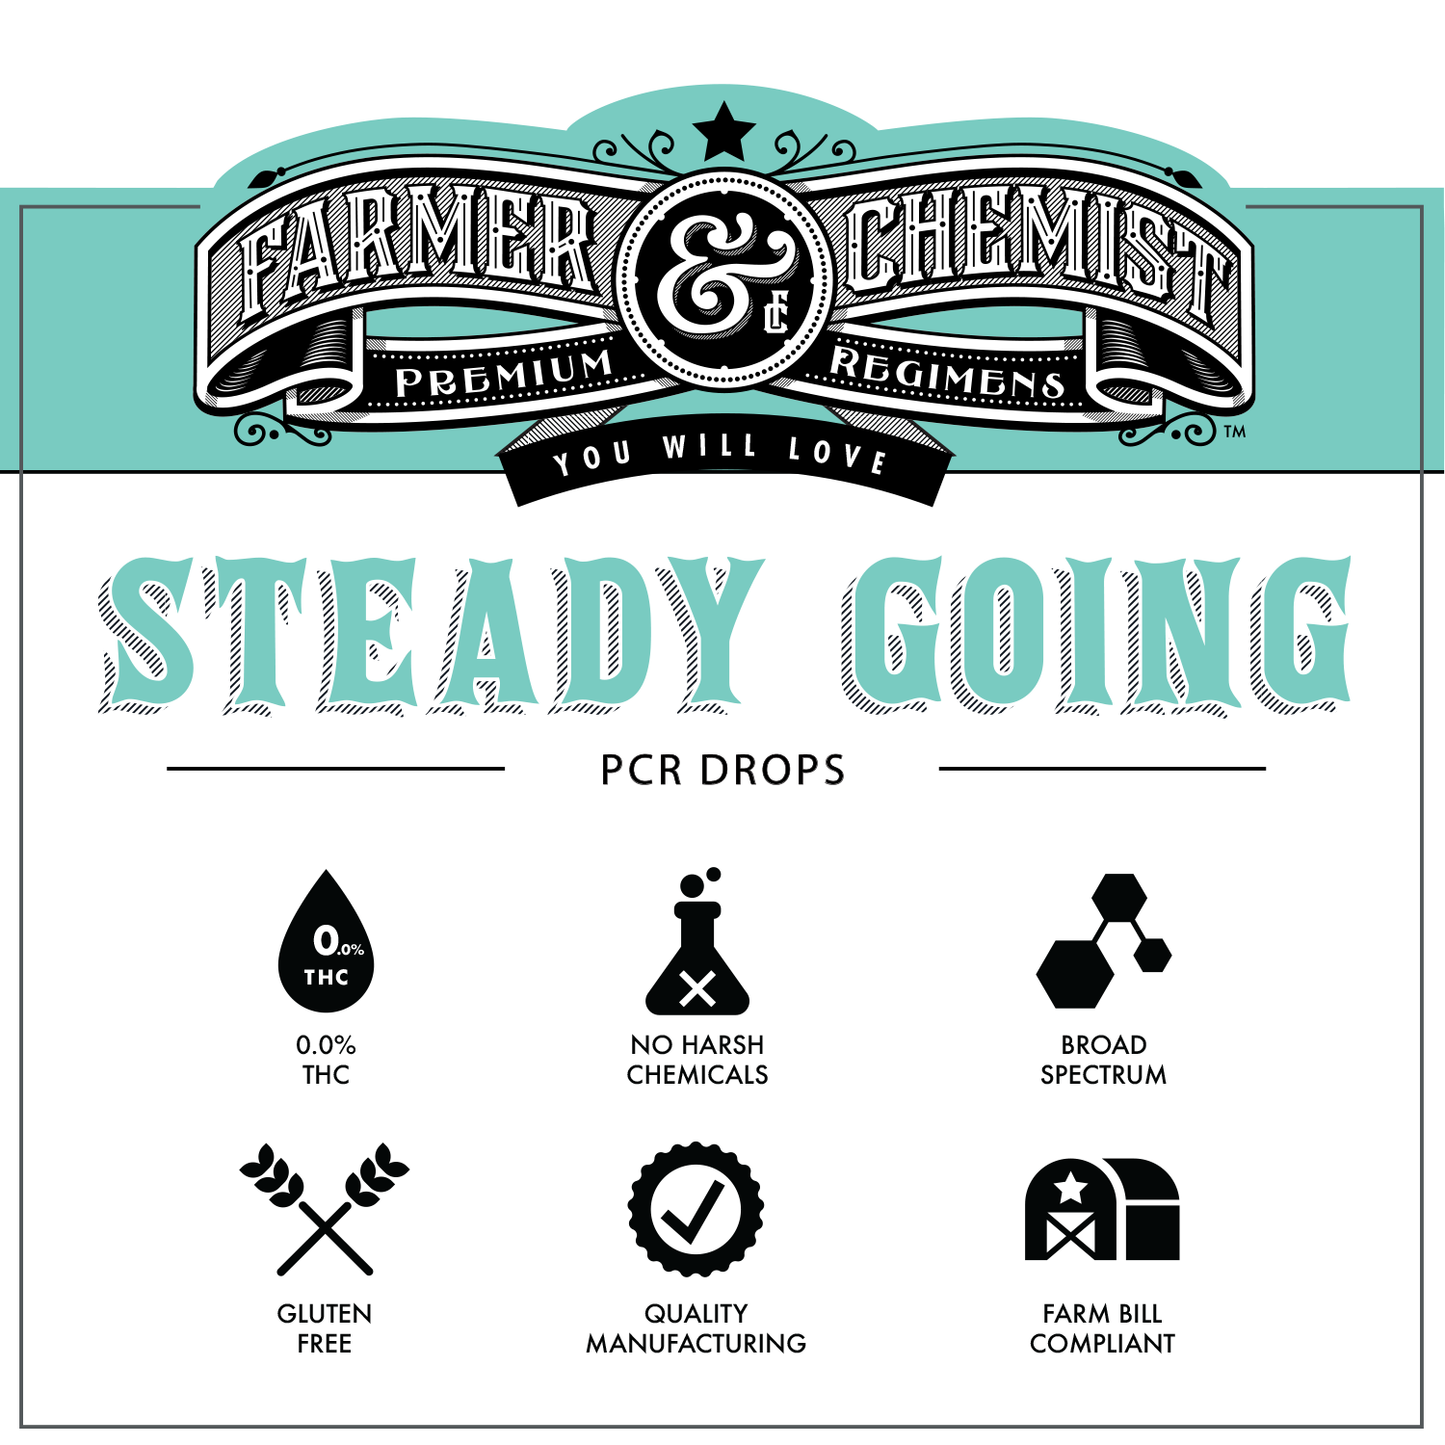 STEADY GOING - Natural 1500mg PCR Tincture (Case pack of 4)